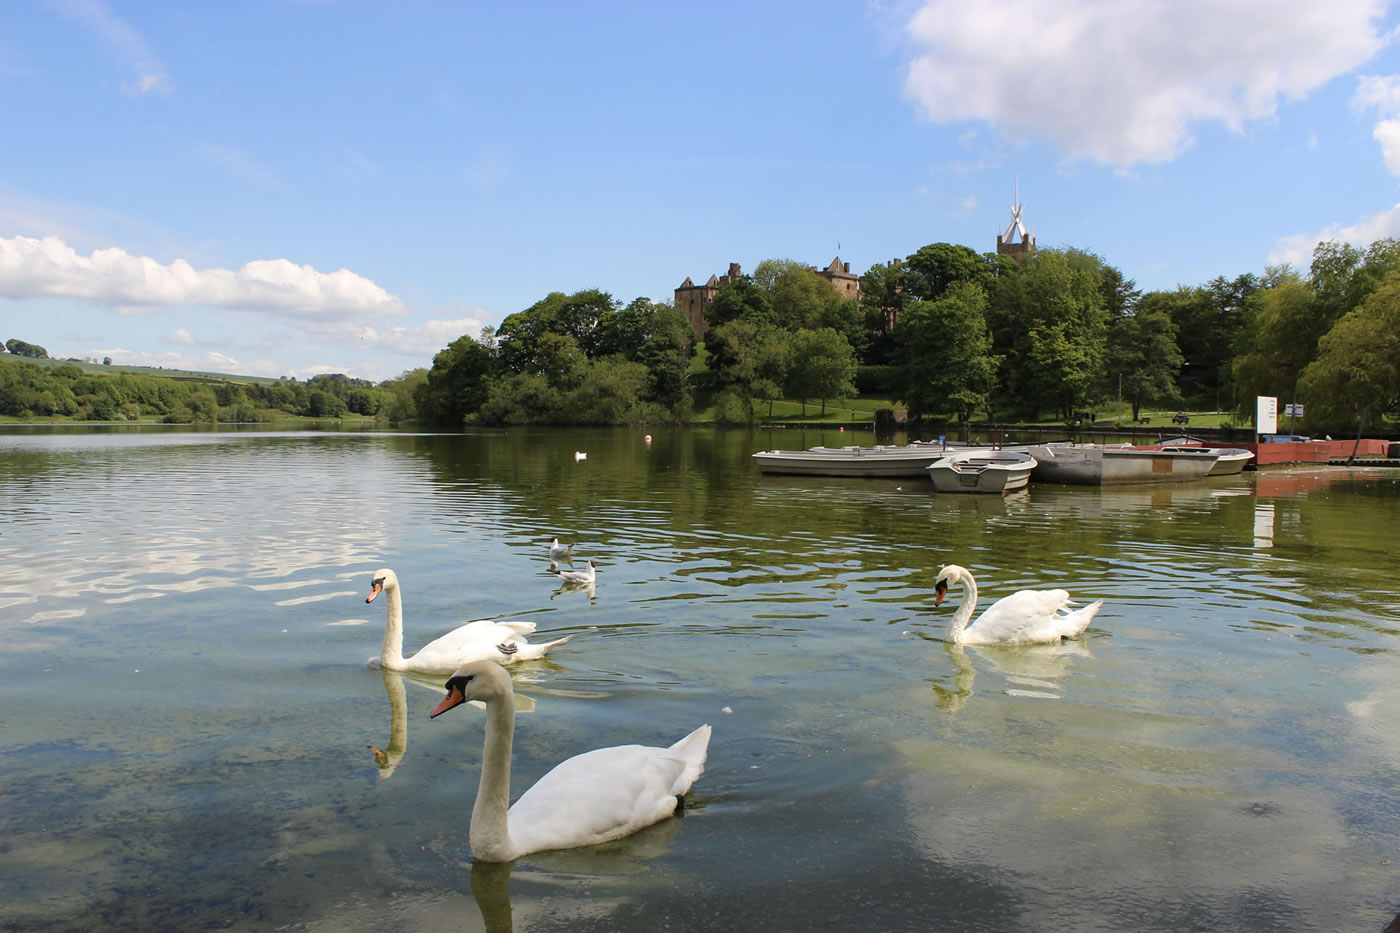 Linlithgow Loch with Linlithgow Palace in Scotland in the background.